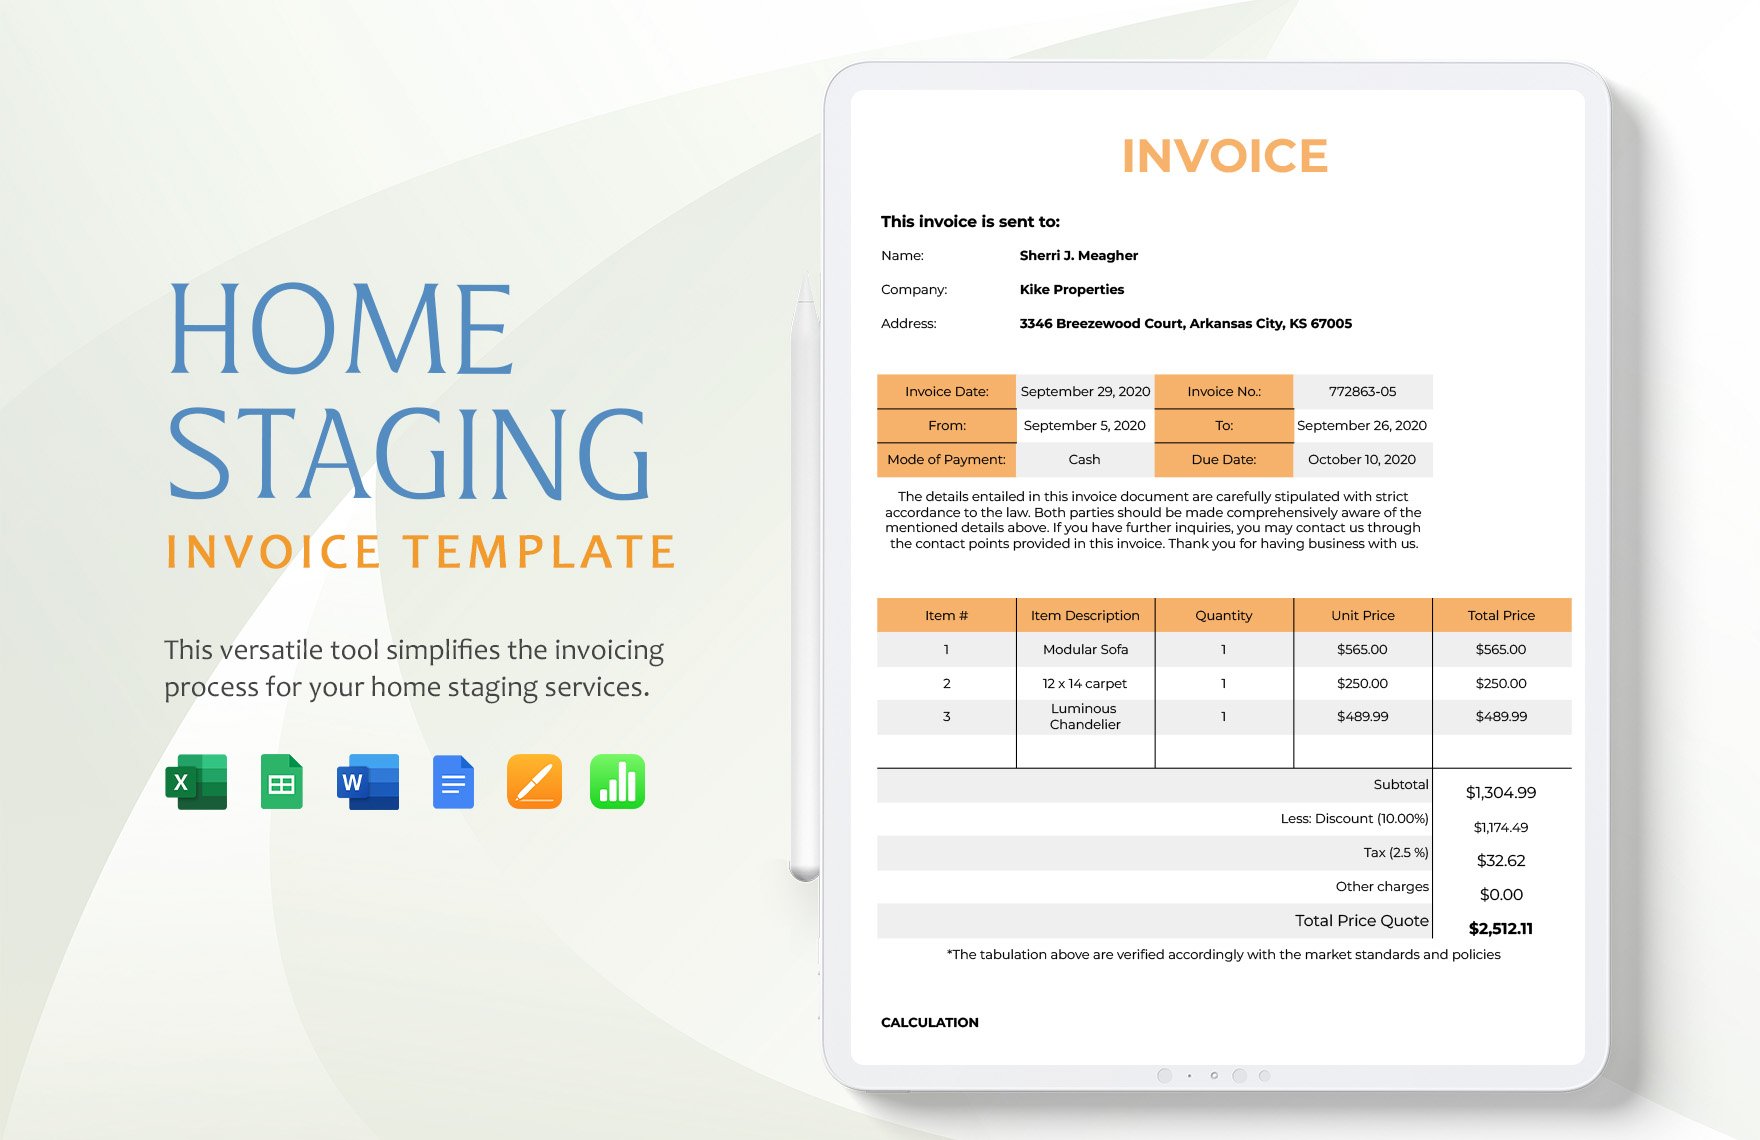 Home Staging Invoice Template in Word, Google Docs, Excel, Google Sheets, Apple Pages, Apple Numbers